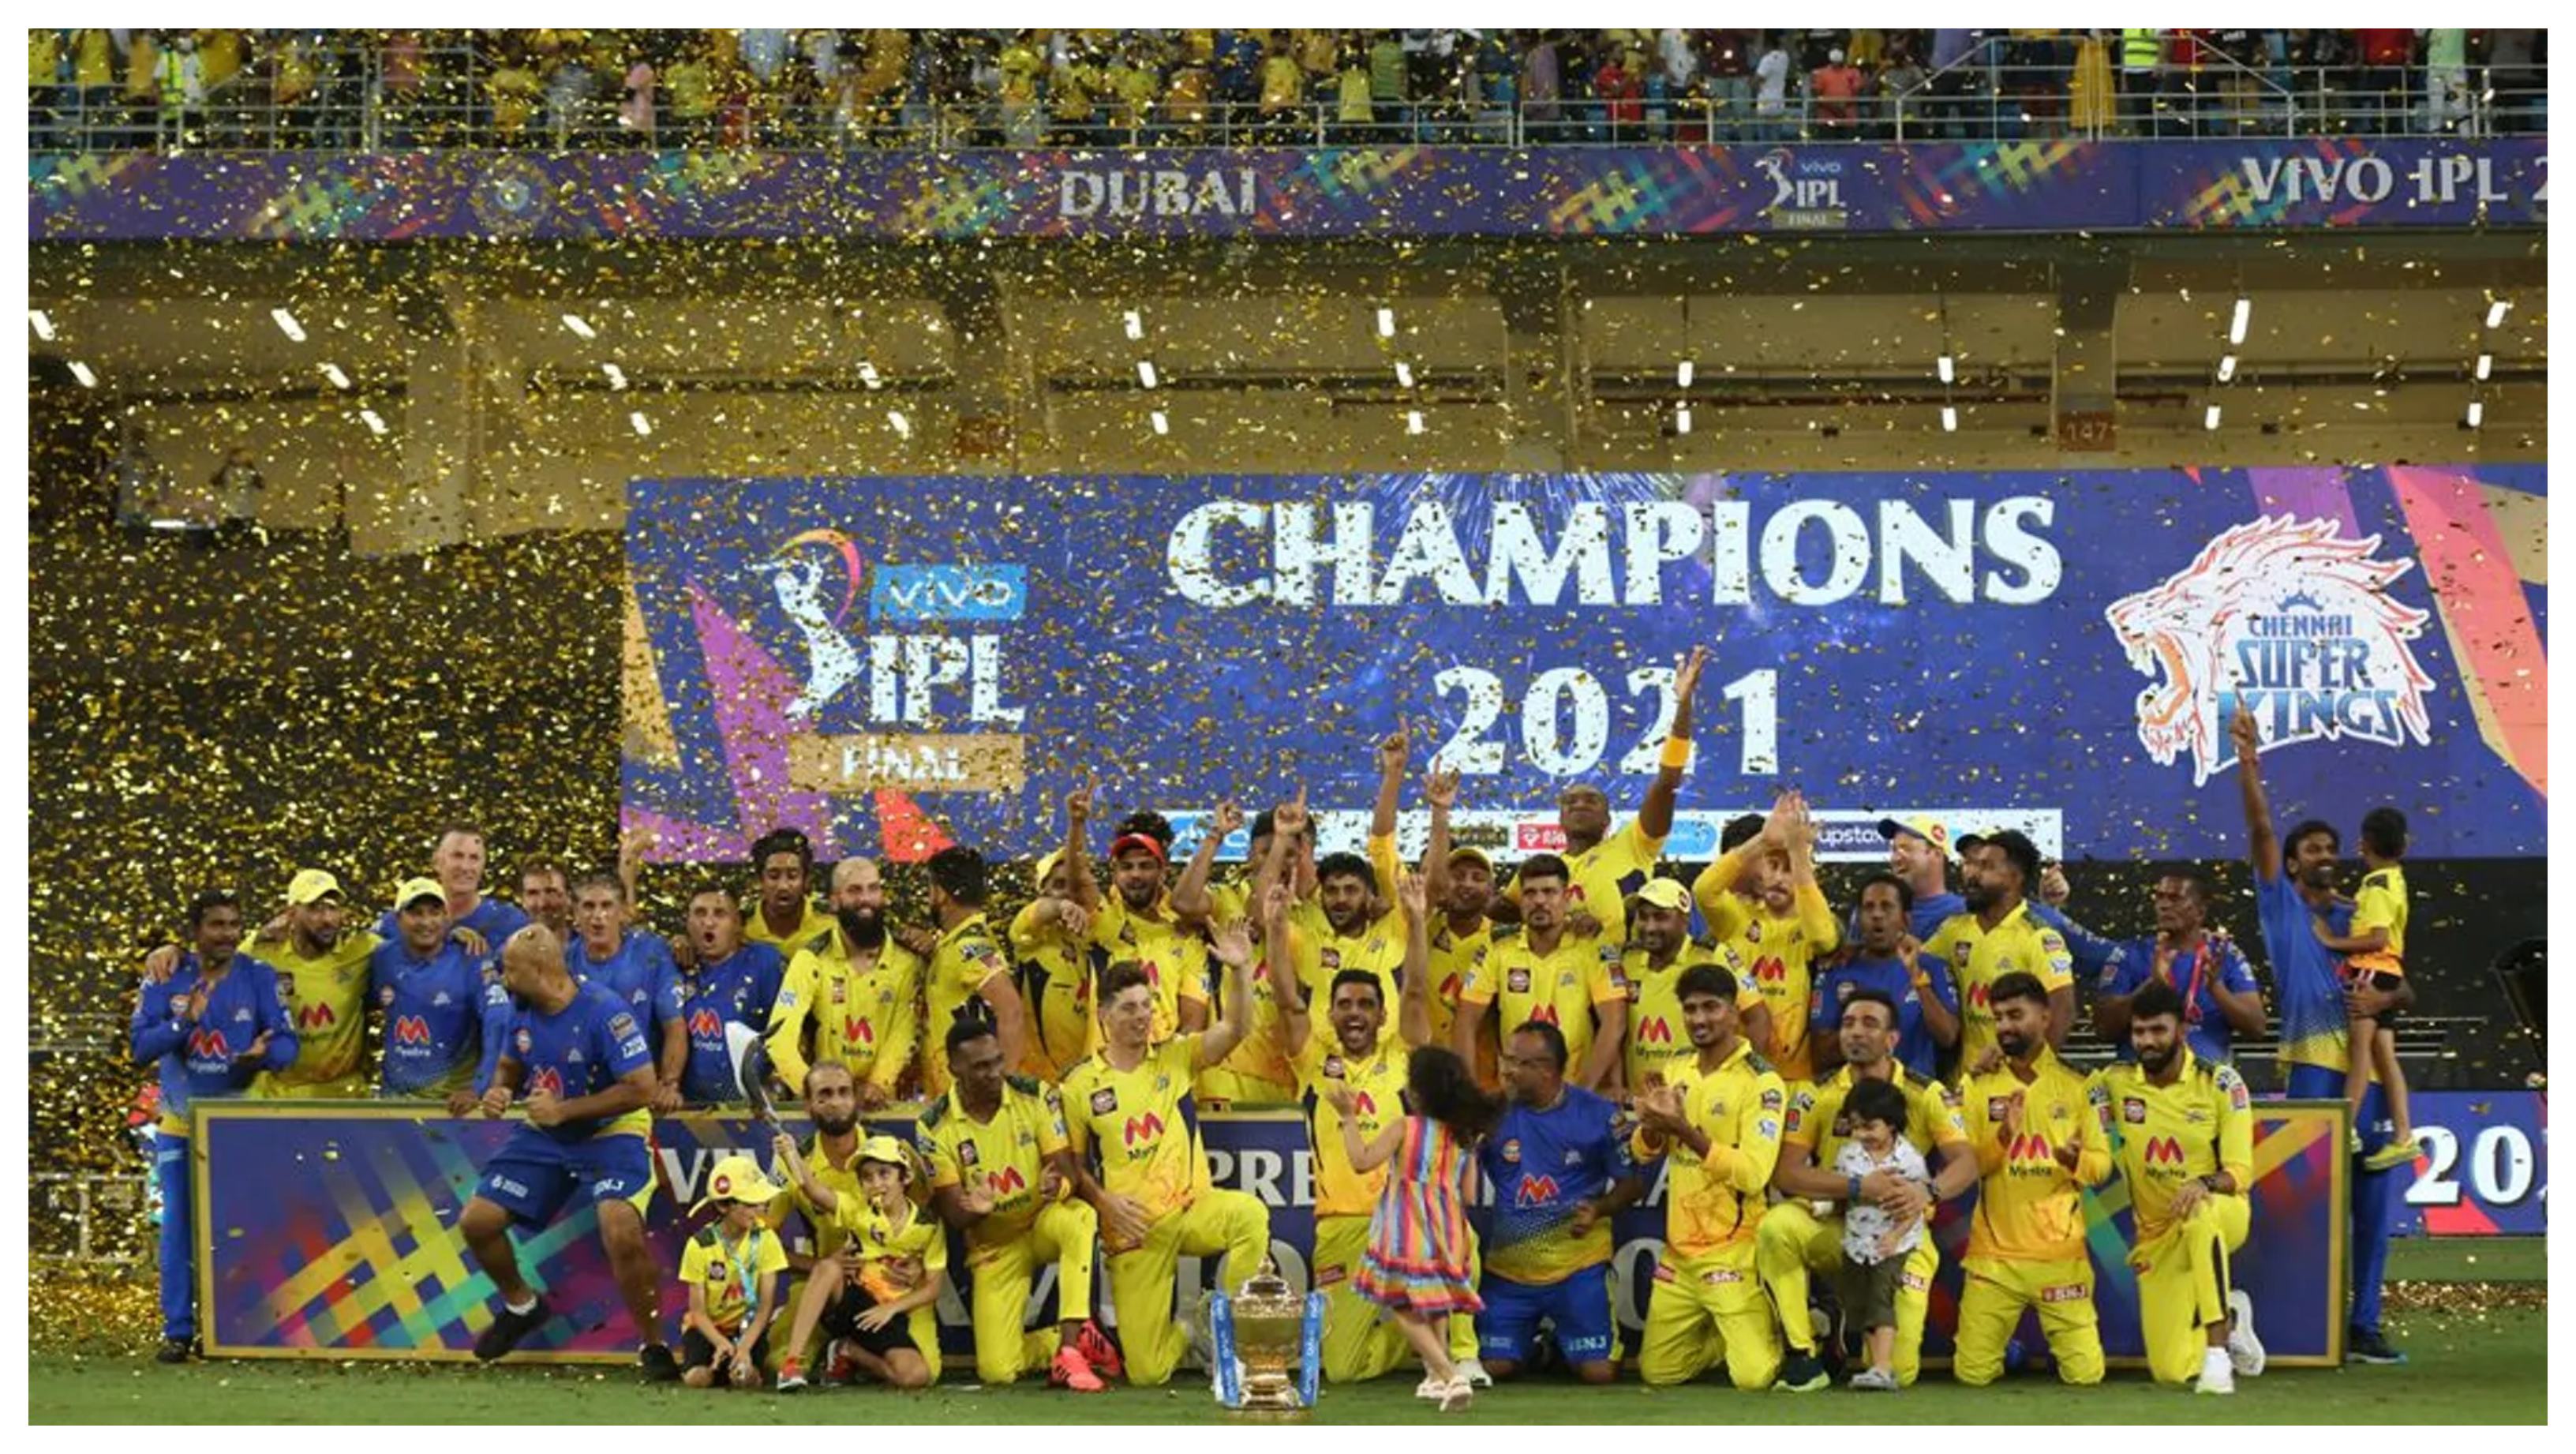 CSK recorded their fourth IPL title win | BCCI/IPL